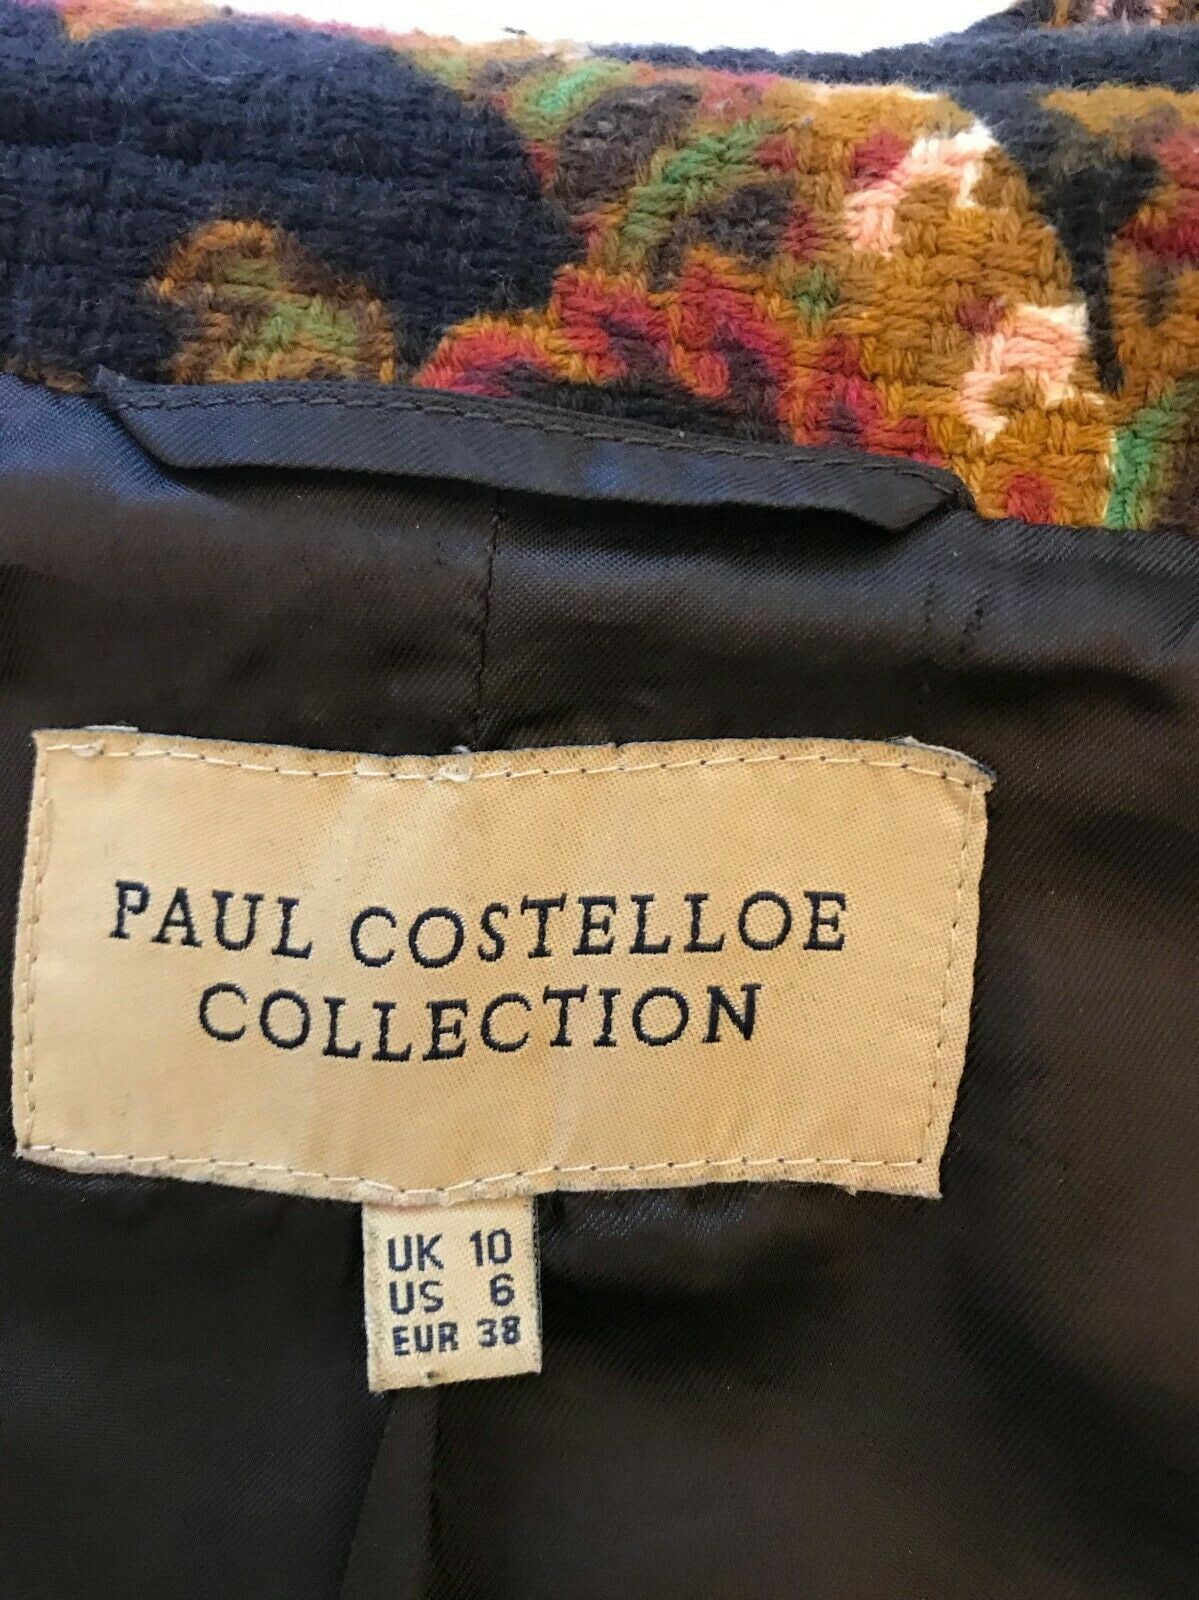 Paul Costelloe Collection Women's Floral Tapestry Cotton Jacket UK 10 US 6 EU 38 Timeless Fashions